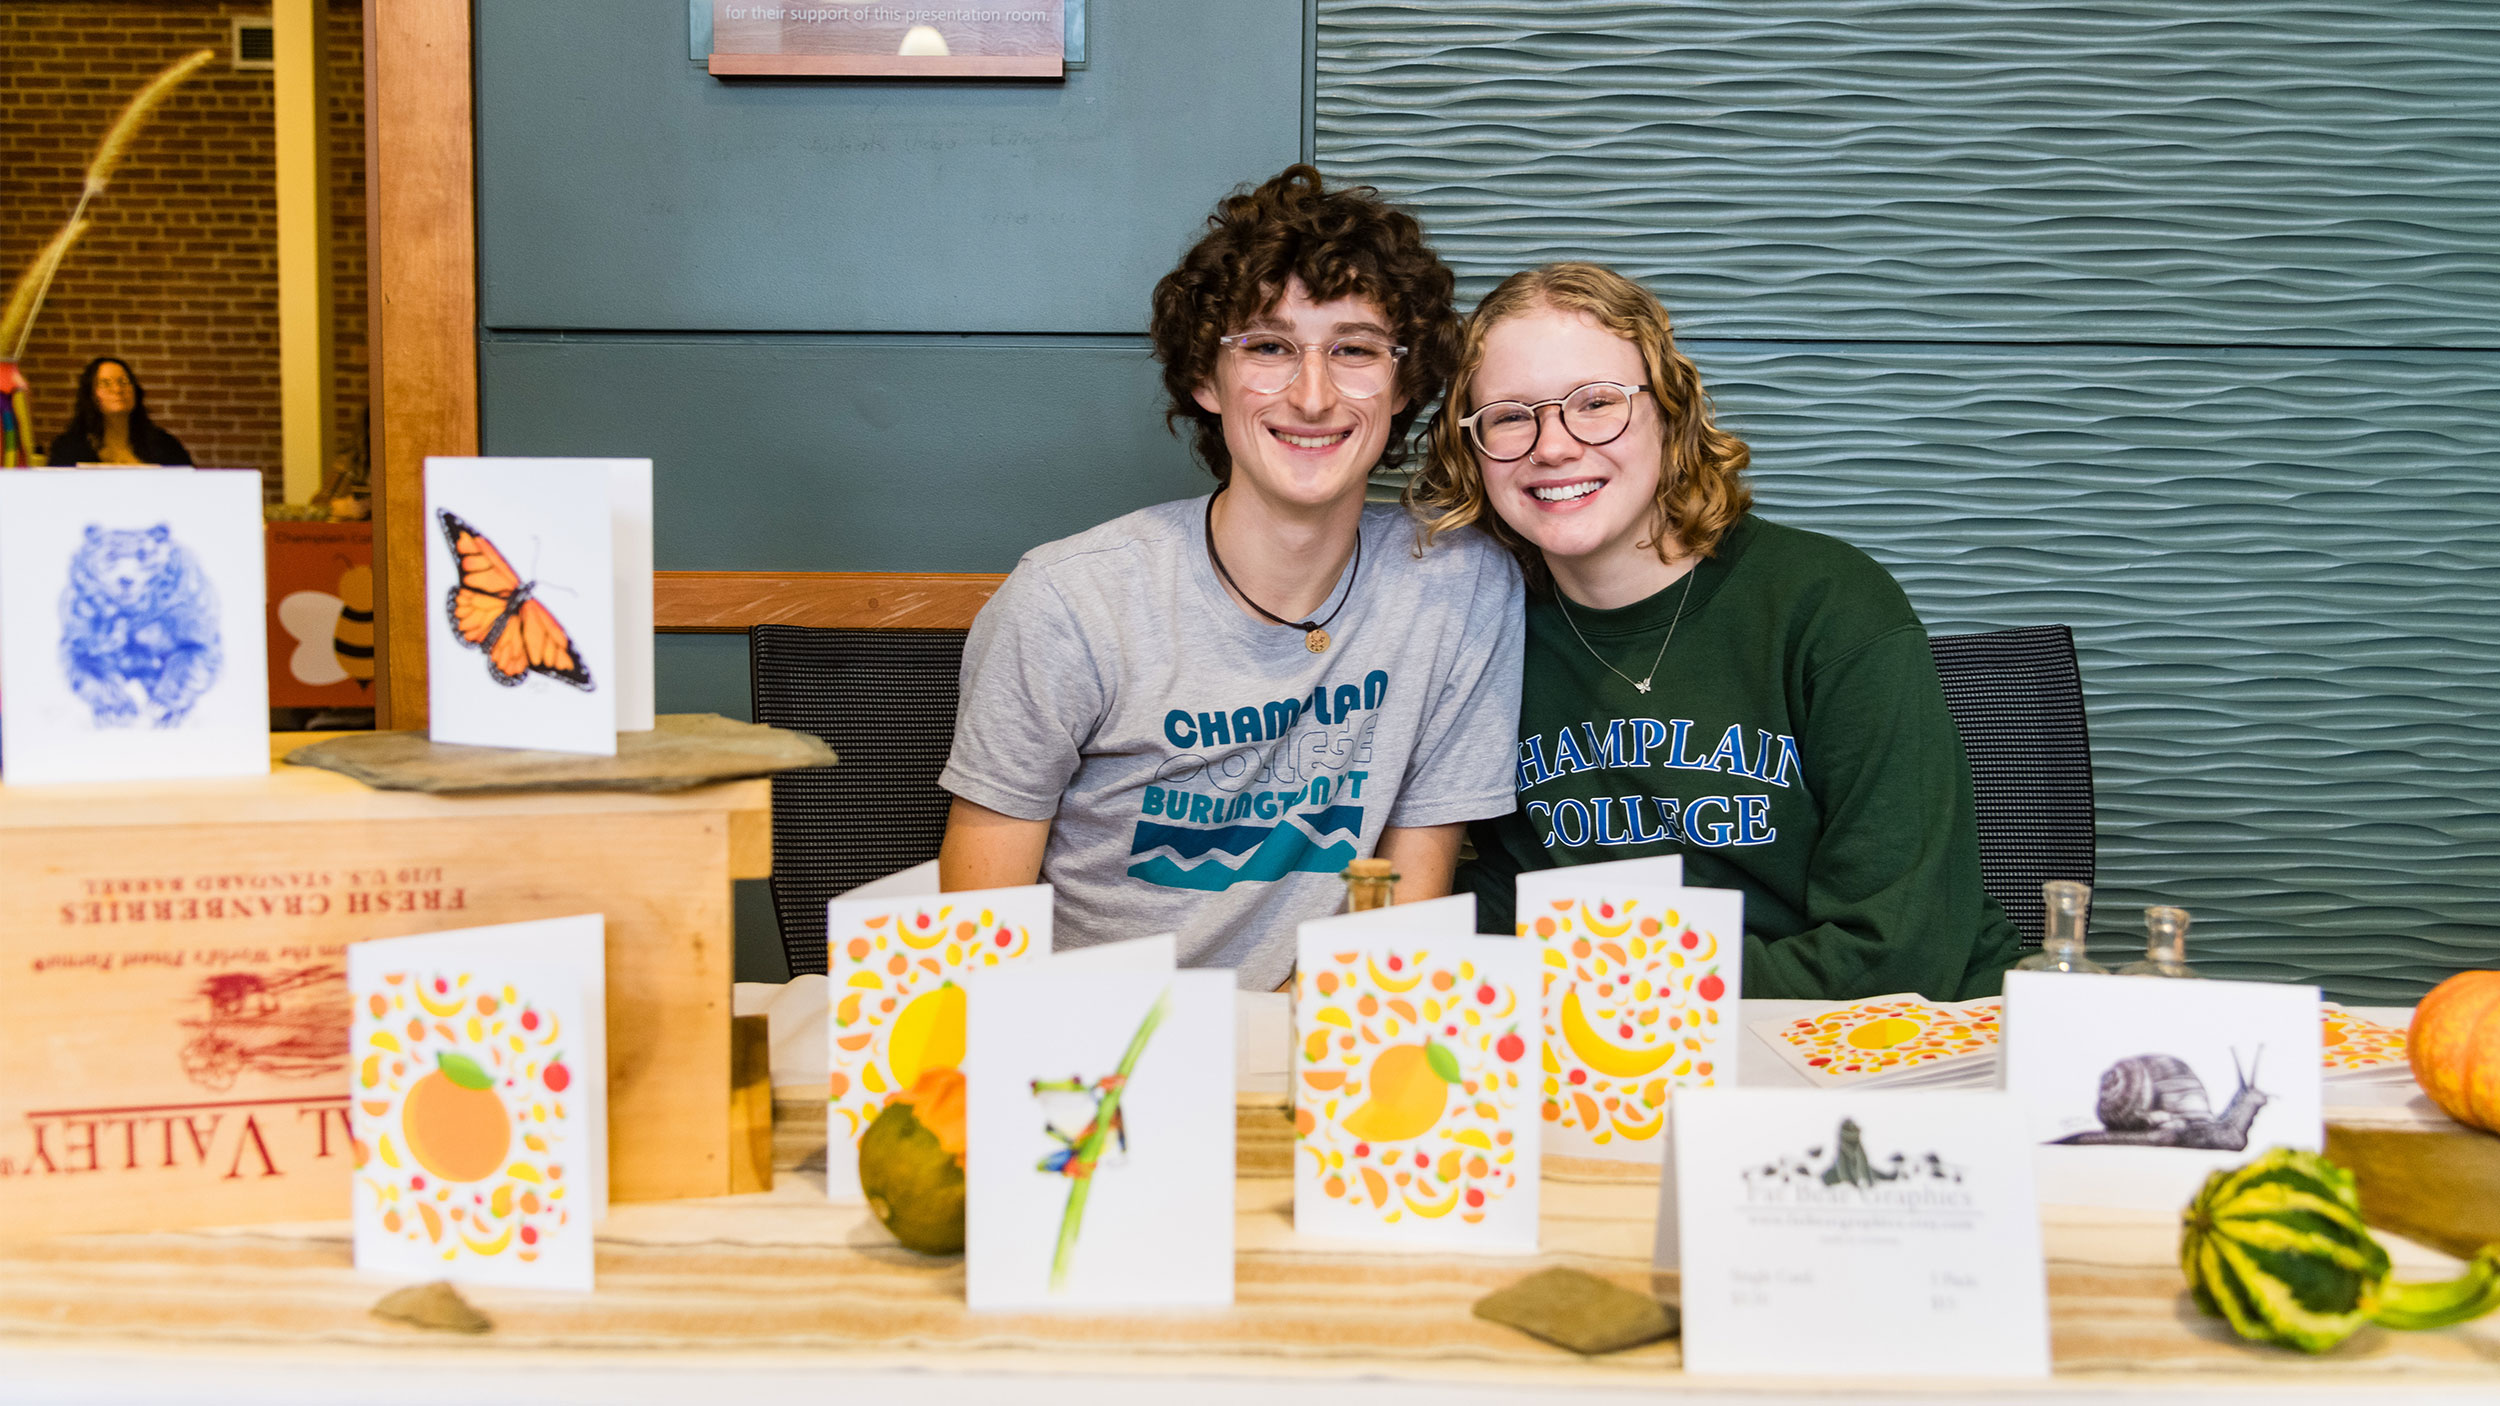 two students smile big sitting at a table covered in homemade cards with yellow fruit drawn on them